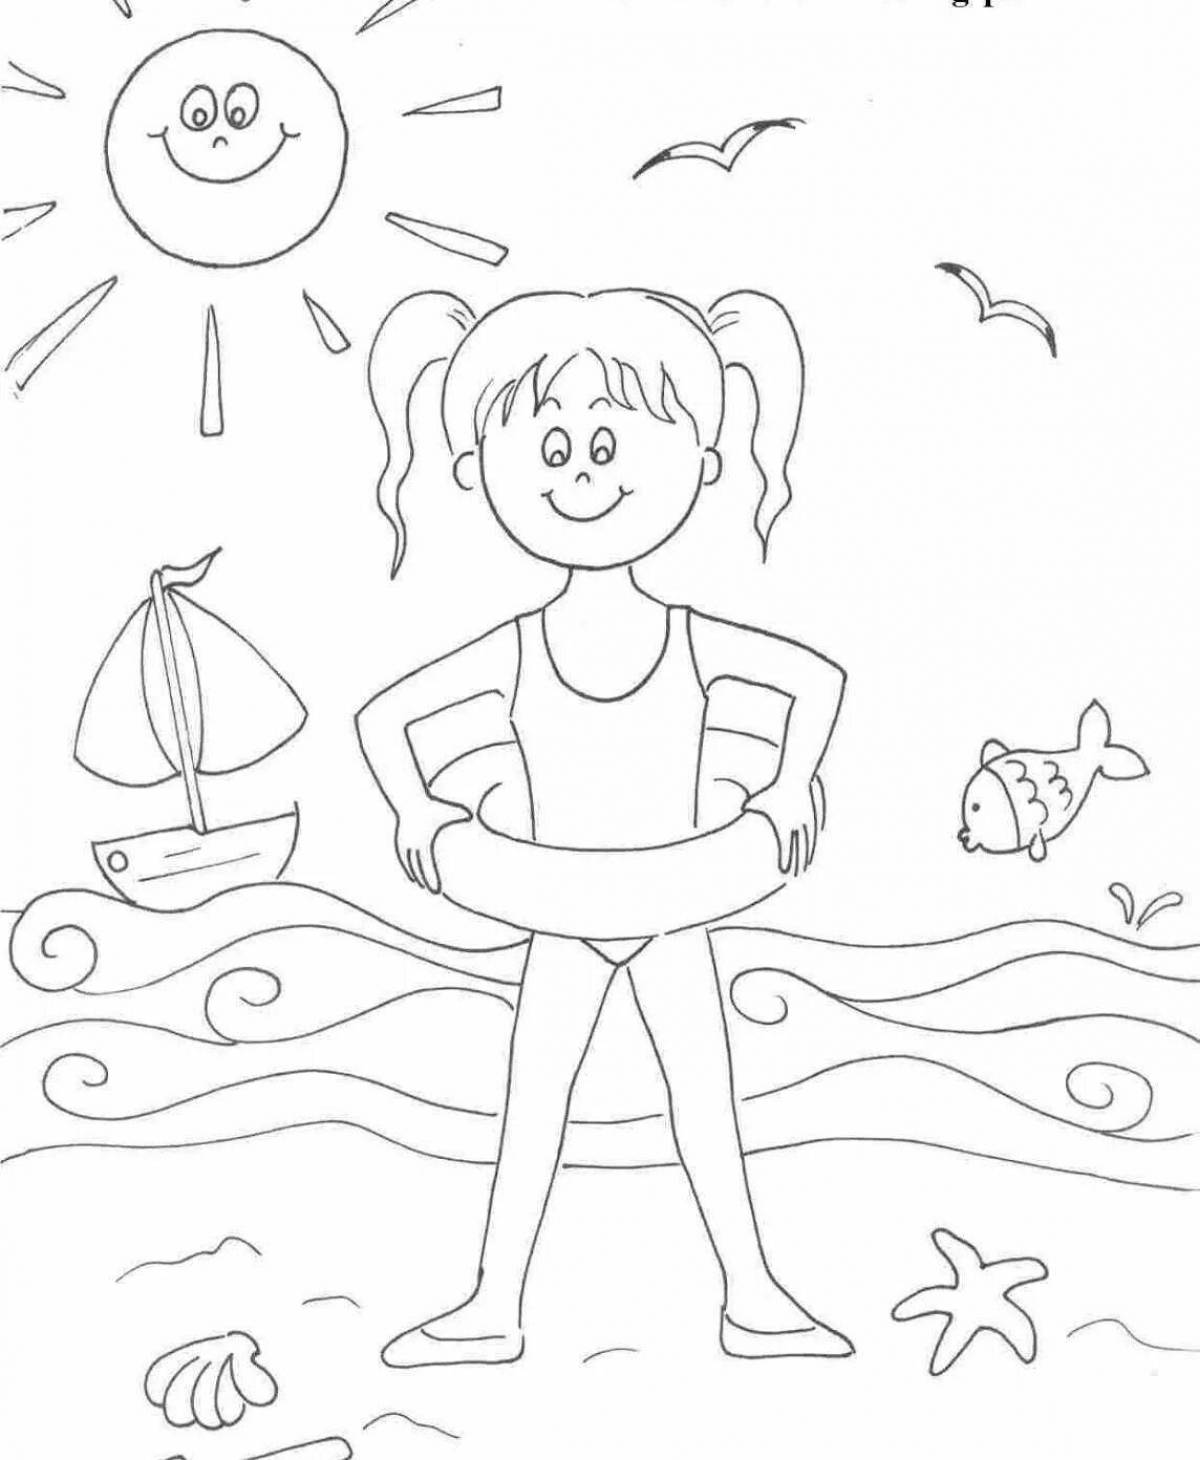 Adorable water safety coloring page